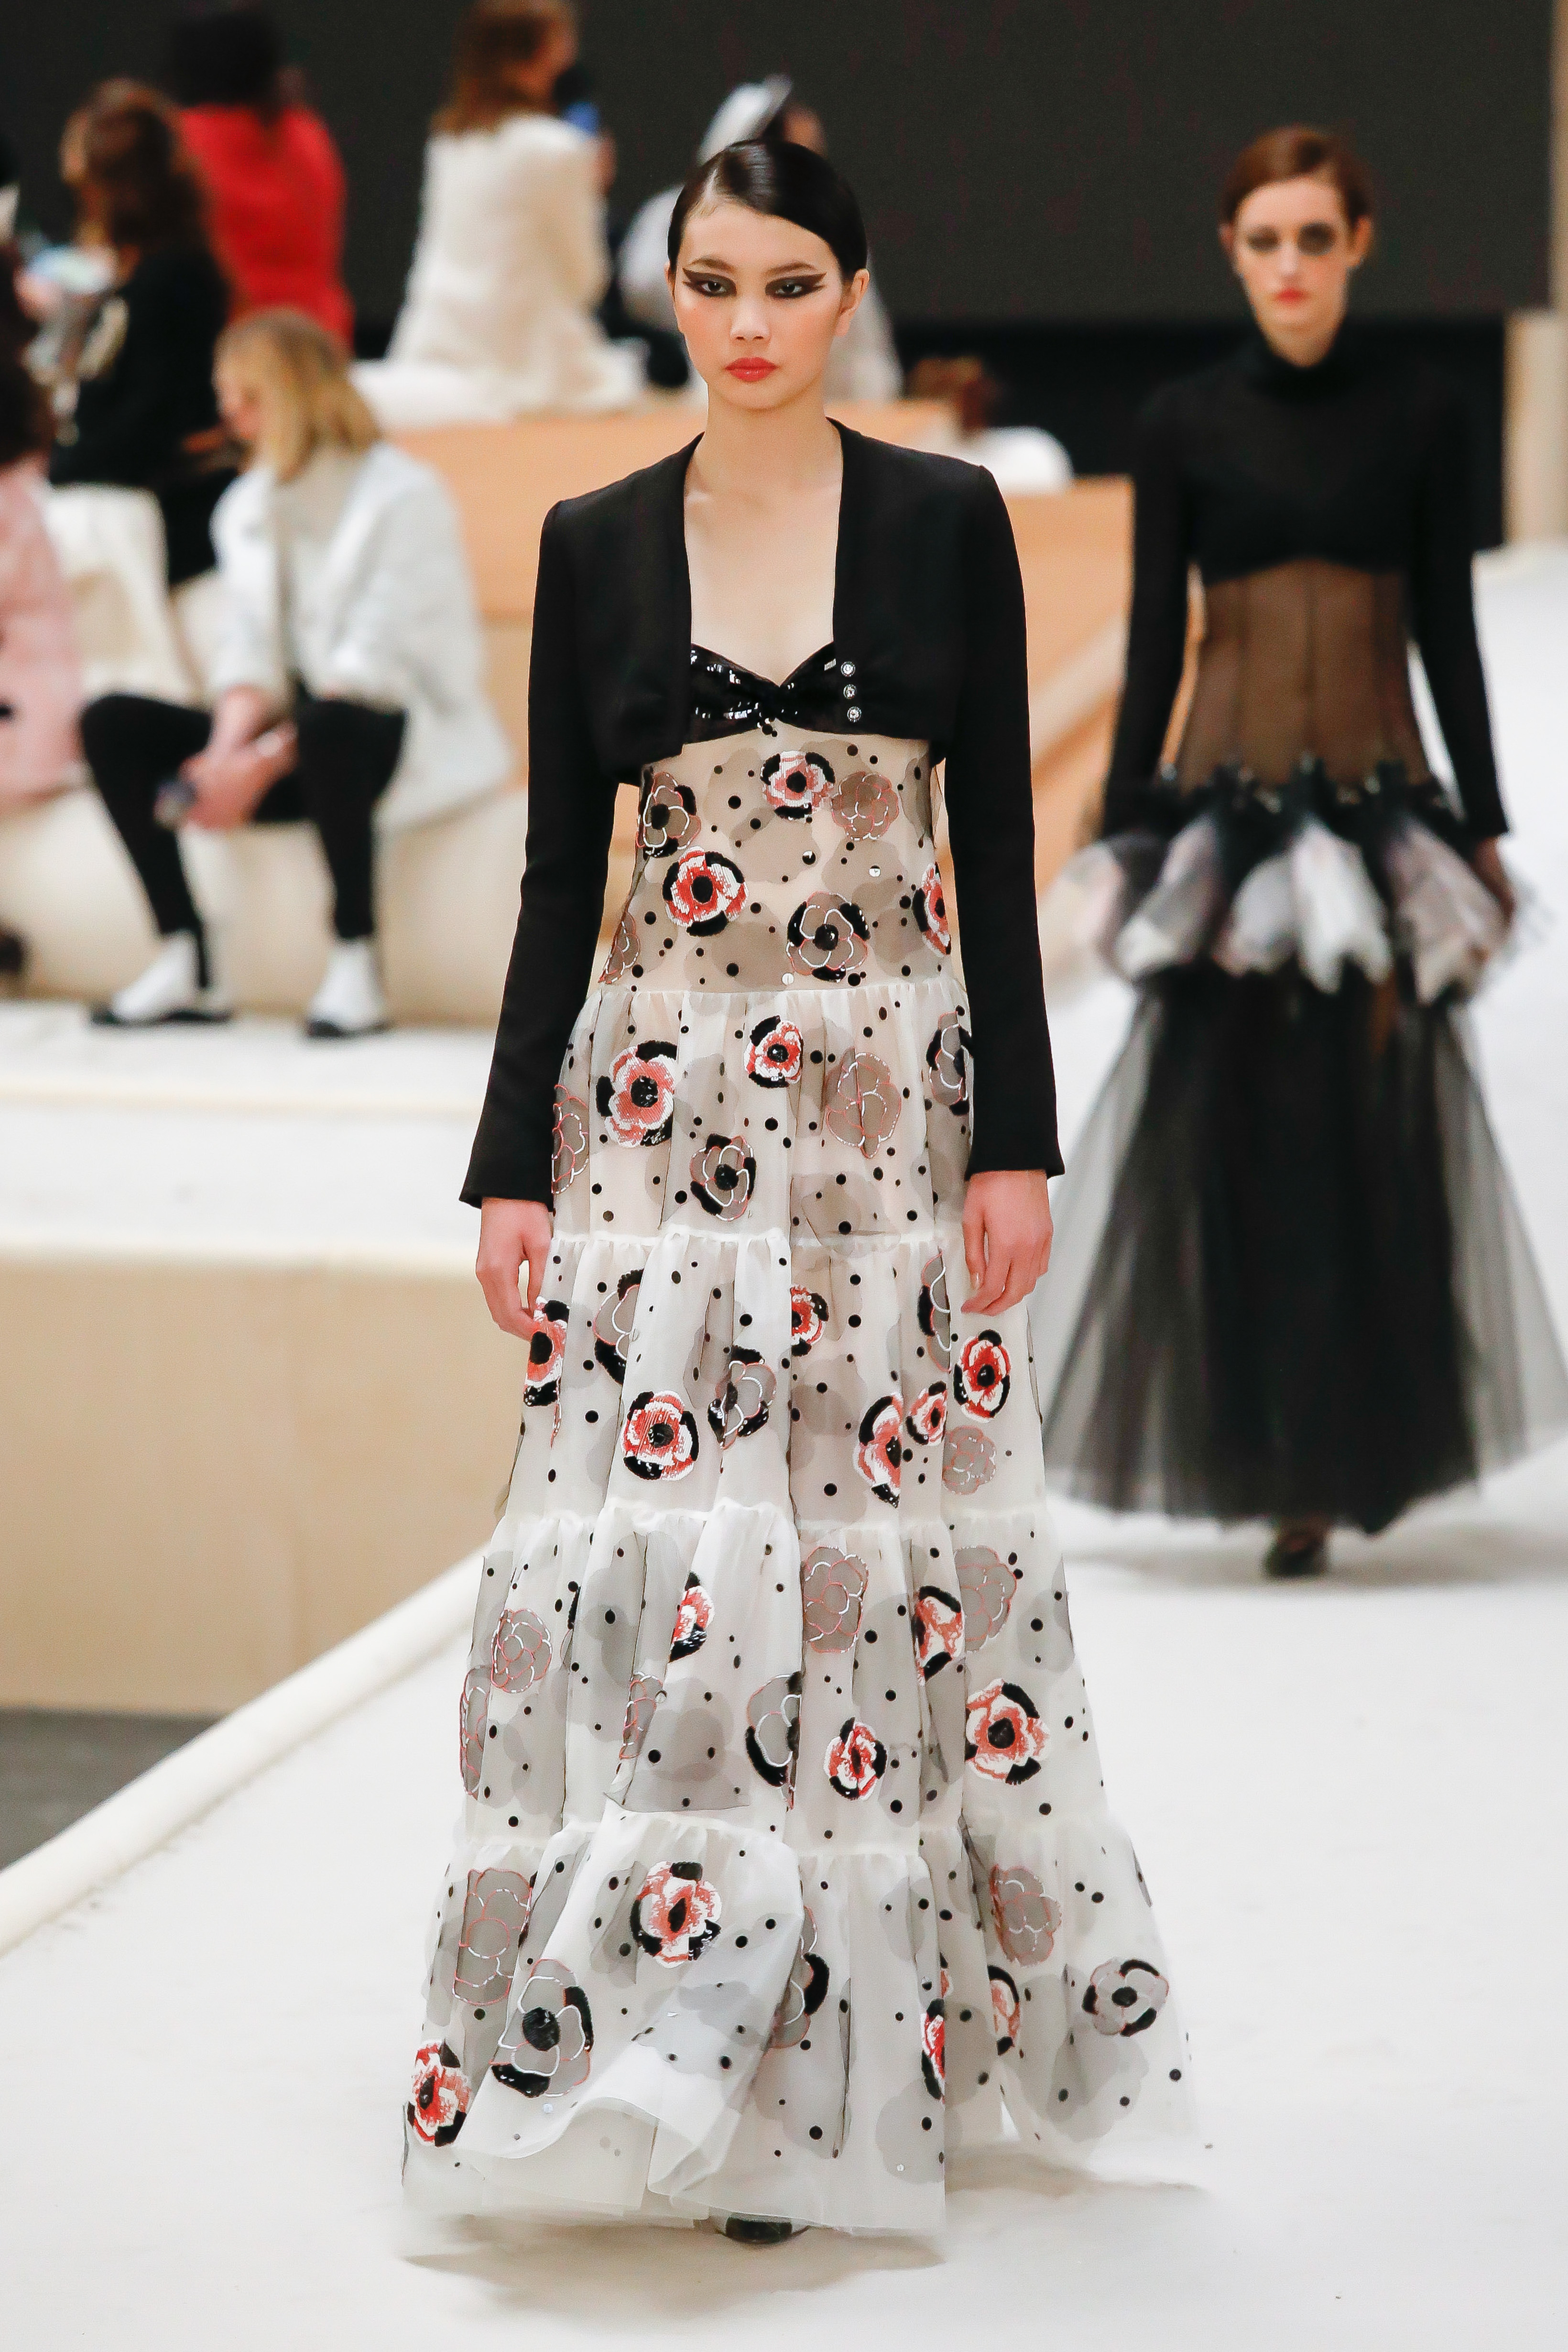 Virginie Viard Revisits The Original 'Roaring 20s' For Chanel Haute Couture